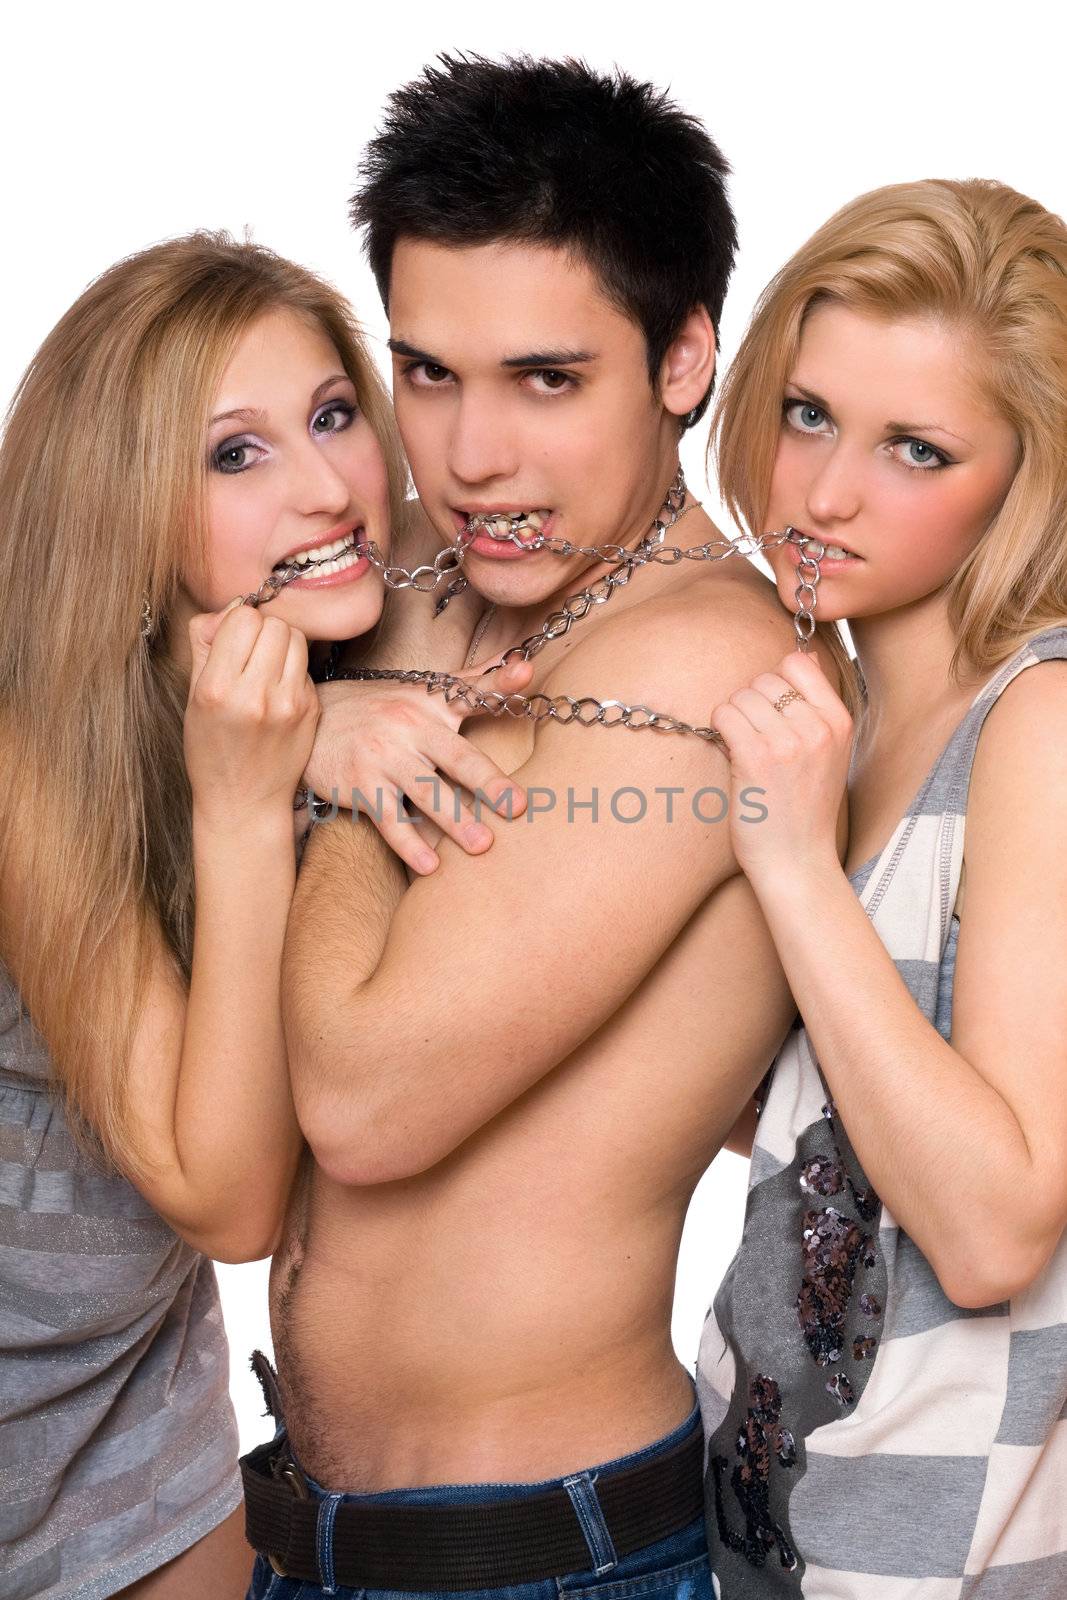 Two pretty girls and a guy in chains